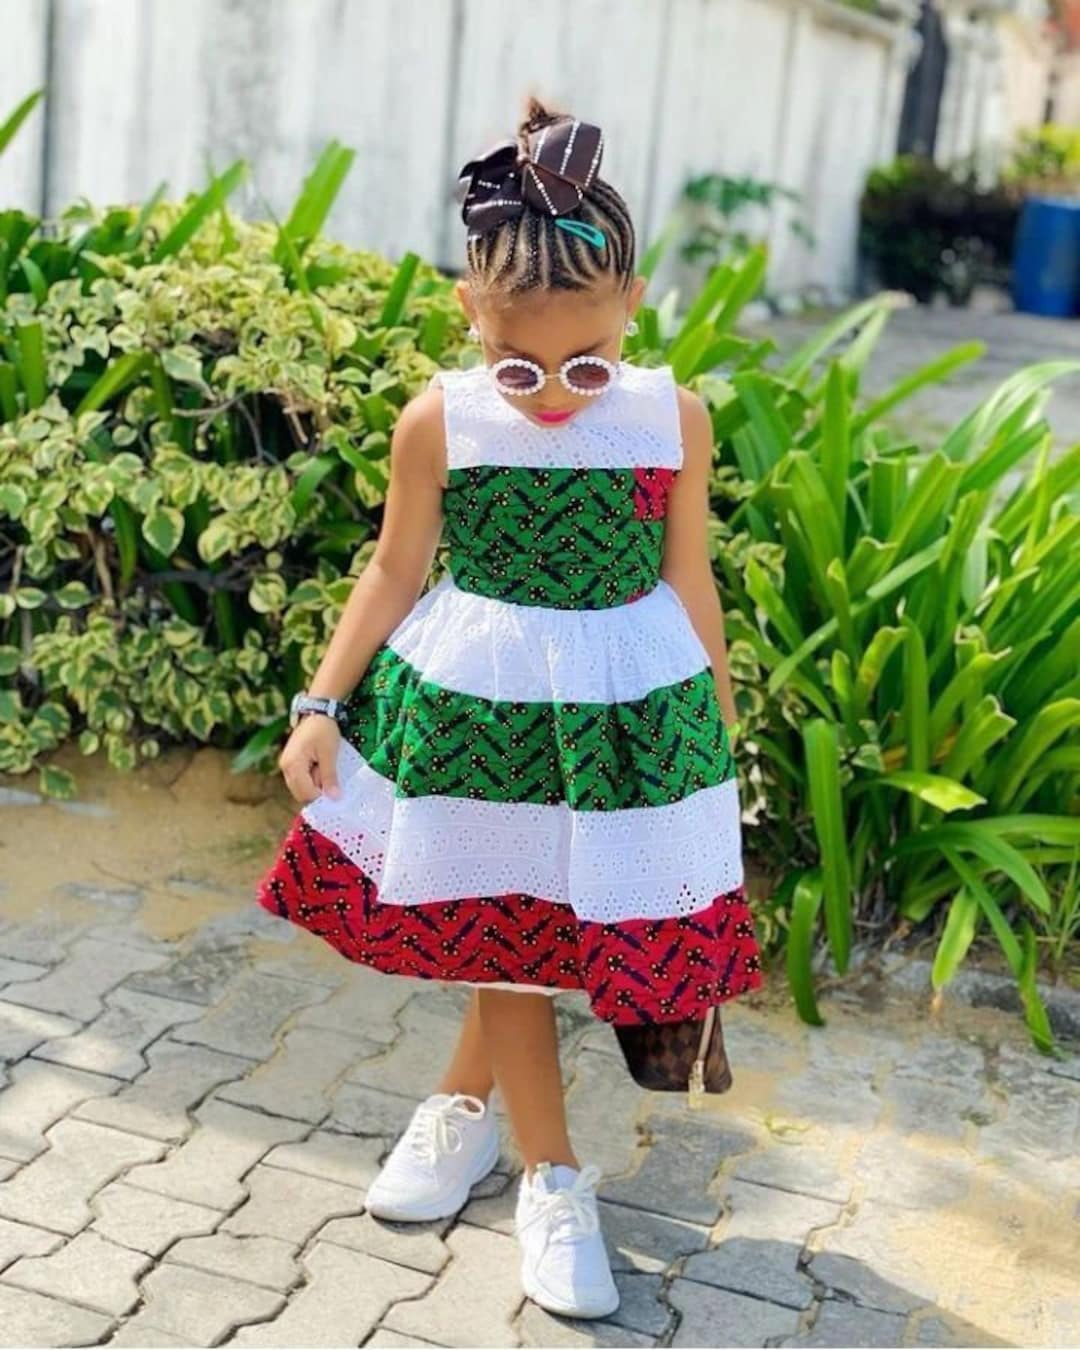 CHECK OUT THESE KID FASHION SLAYERS  African dresses for kids, Kids dress,  Dresses kids girl